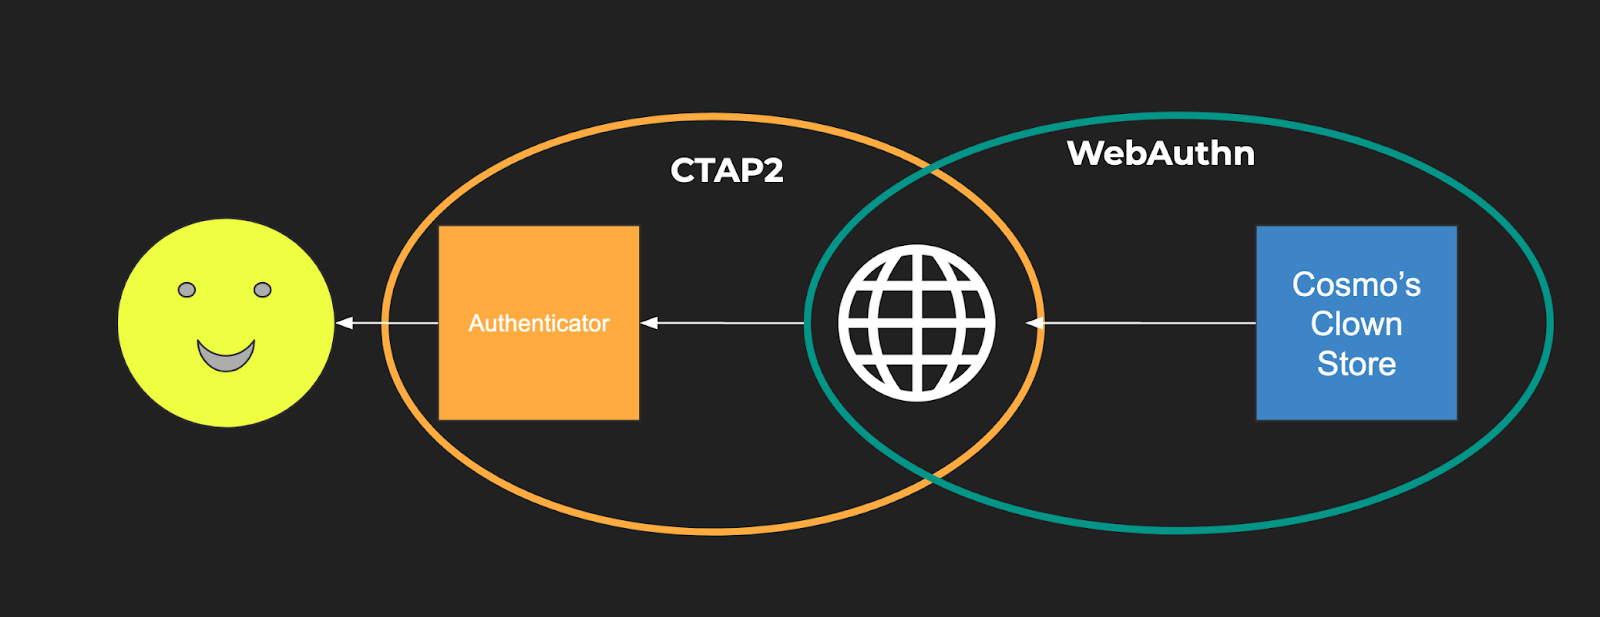 A diagram showing the entities that take part in WebAuthn, with different entities being grouped. The WebAuthn protocol is concerned with the browser to website communication and the CTAP2 protocol addresses communication between the browser and the authenticator.